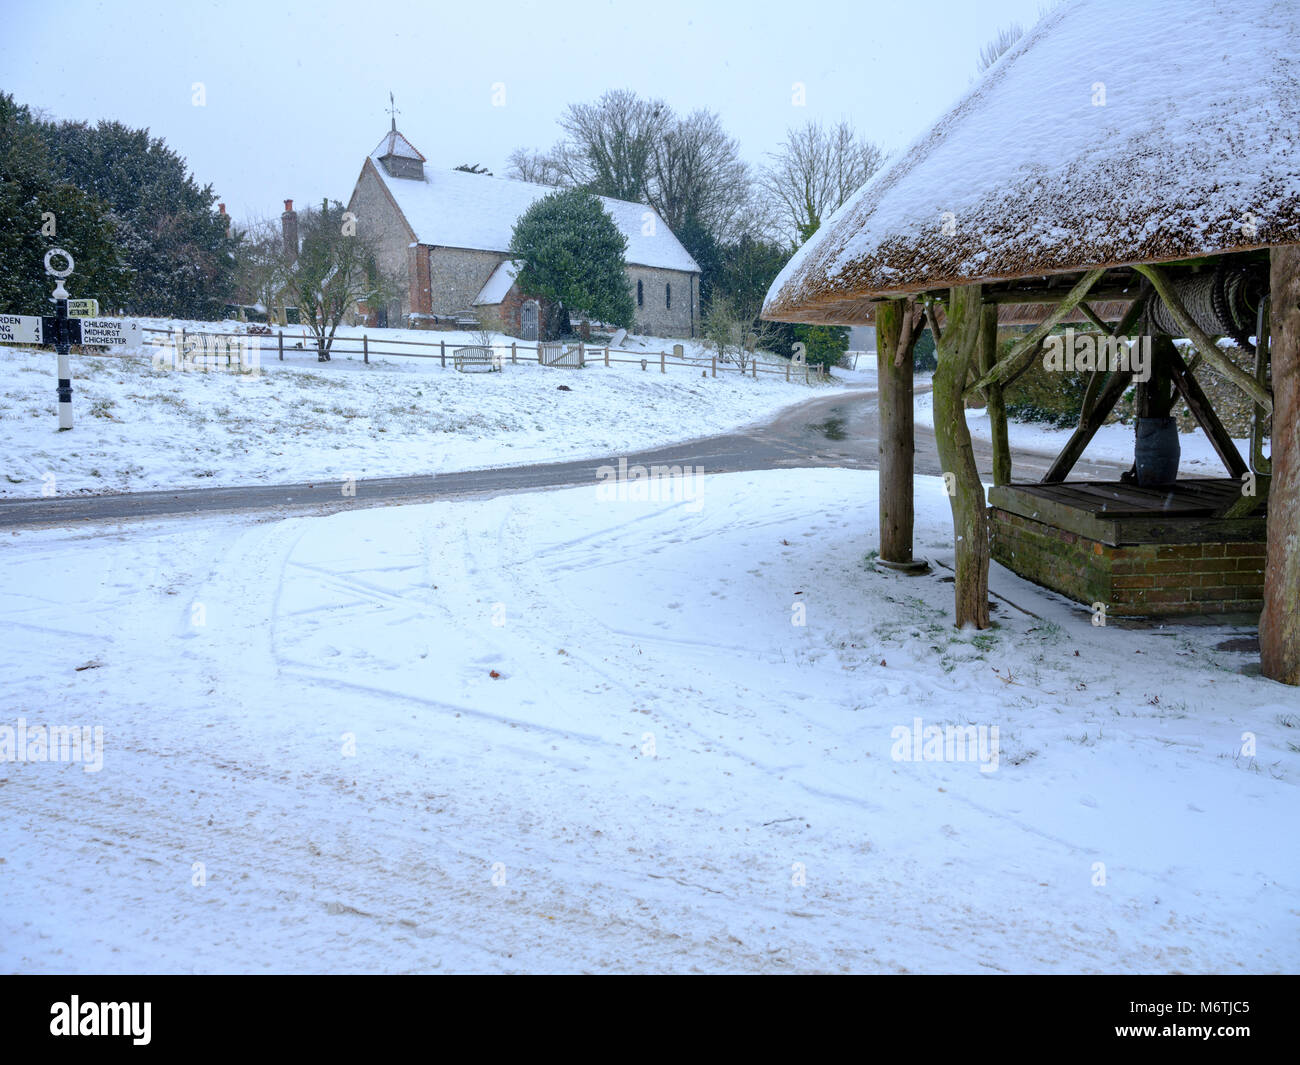 Winter snow scene, St Peter's Church, and village thatched well, East Marden, West Sussex, UK Stock Photo